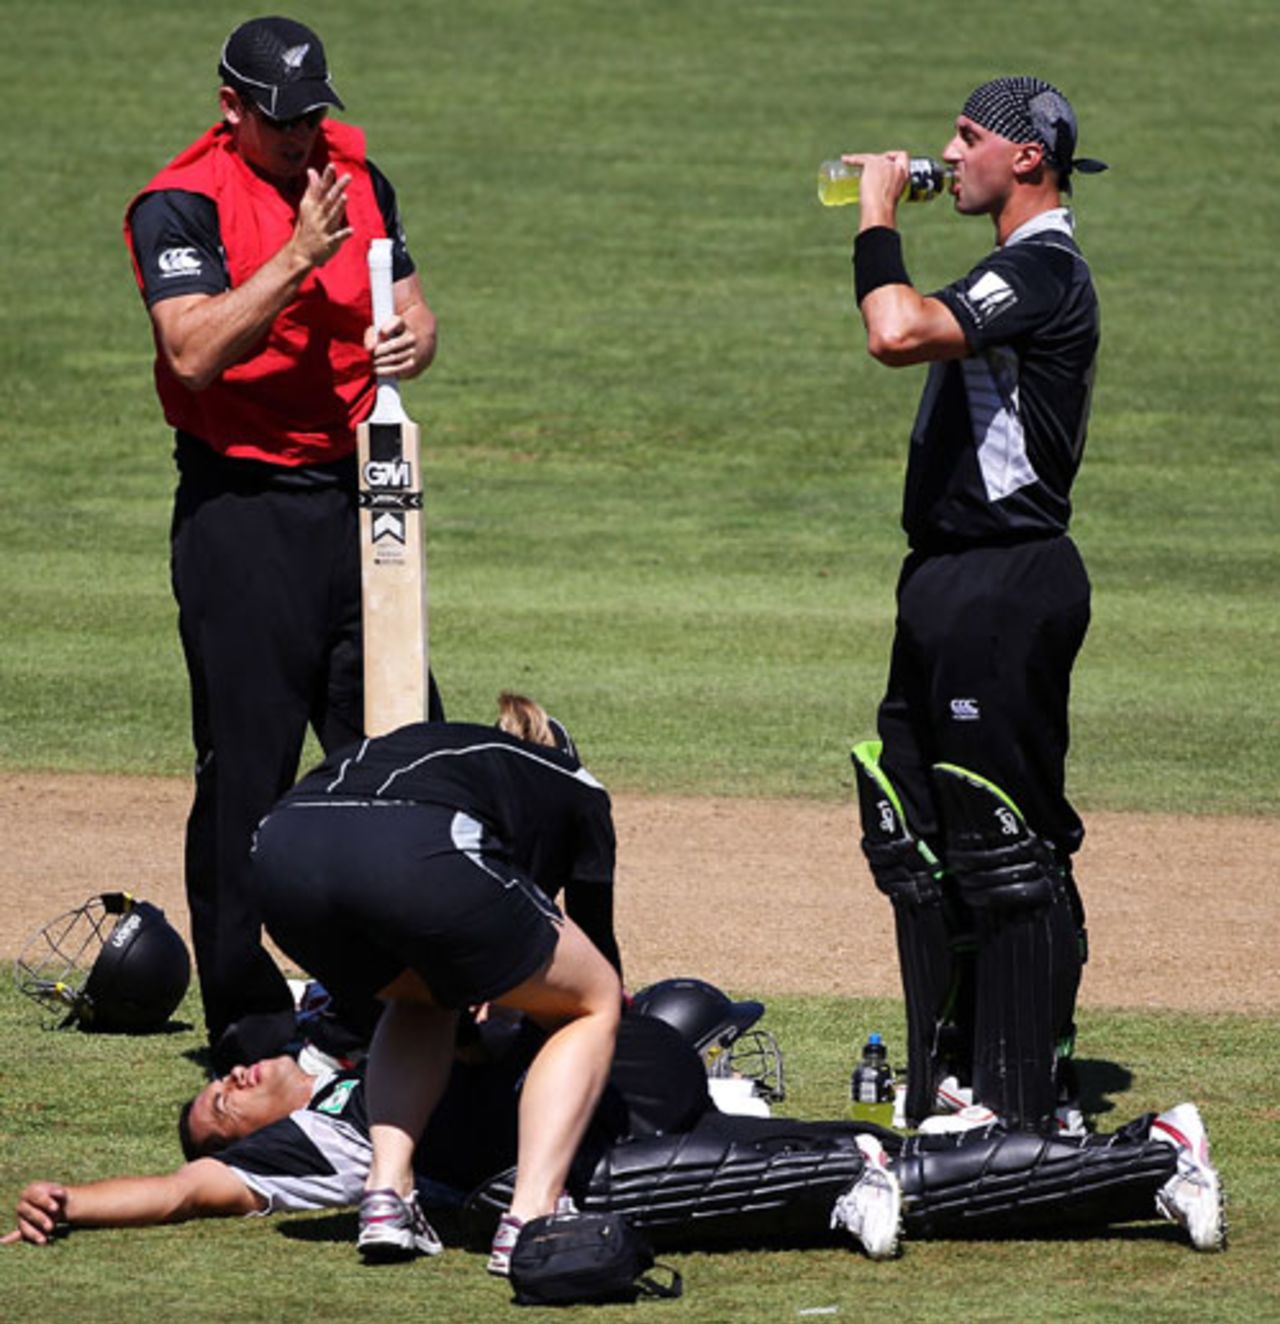 Peter Ingram has a drink while Ross Taylor gets treatment for a sore back, New Zealand v Bangladesh, 1st ODI, Napier, February 5, 2010